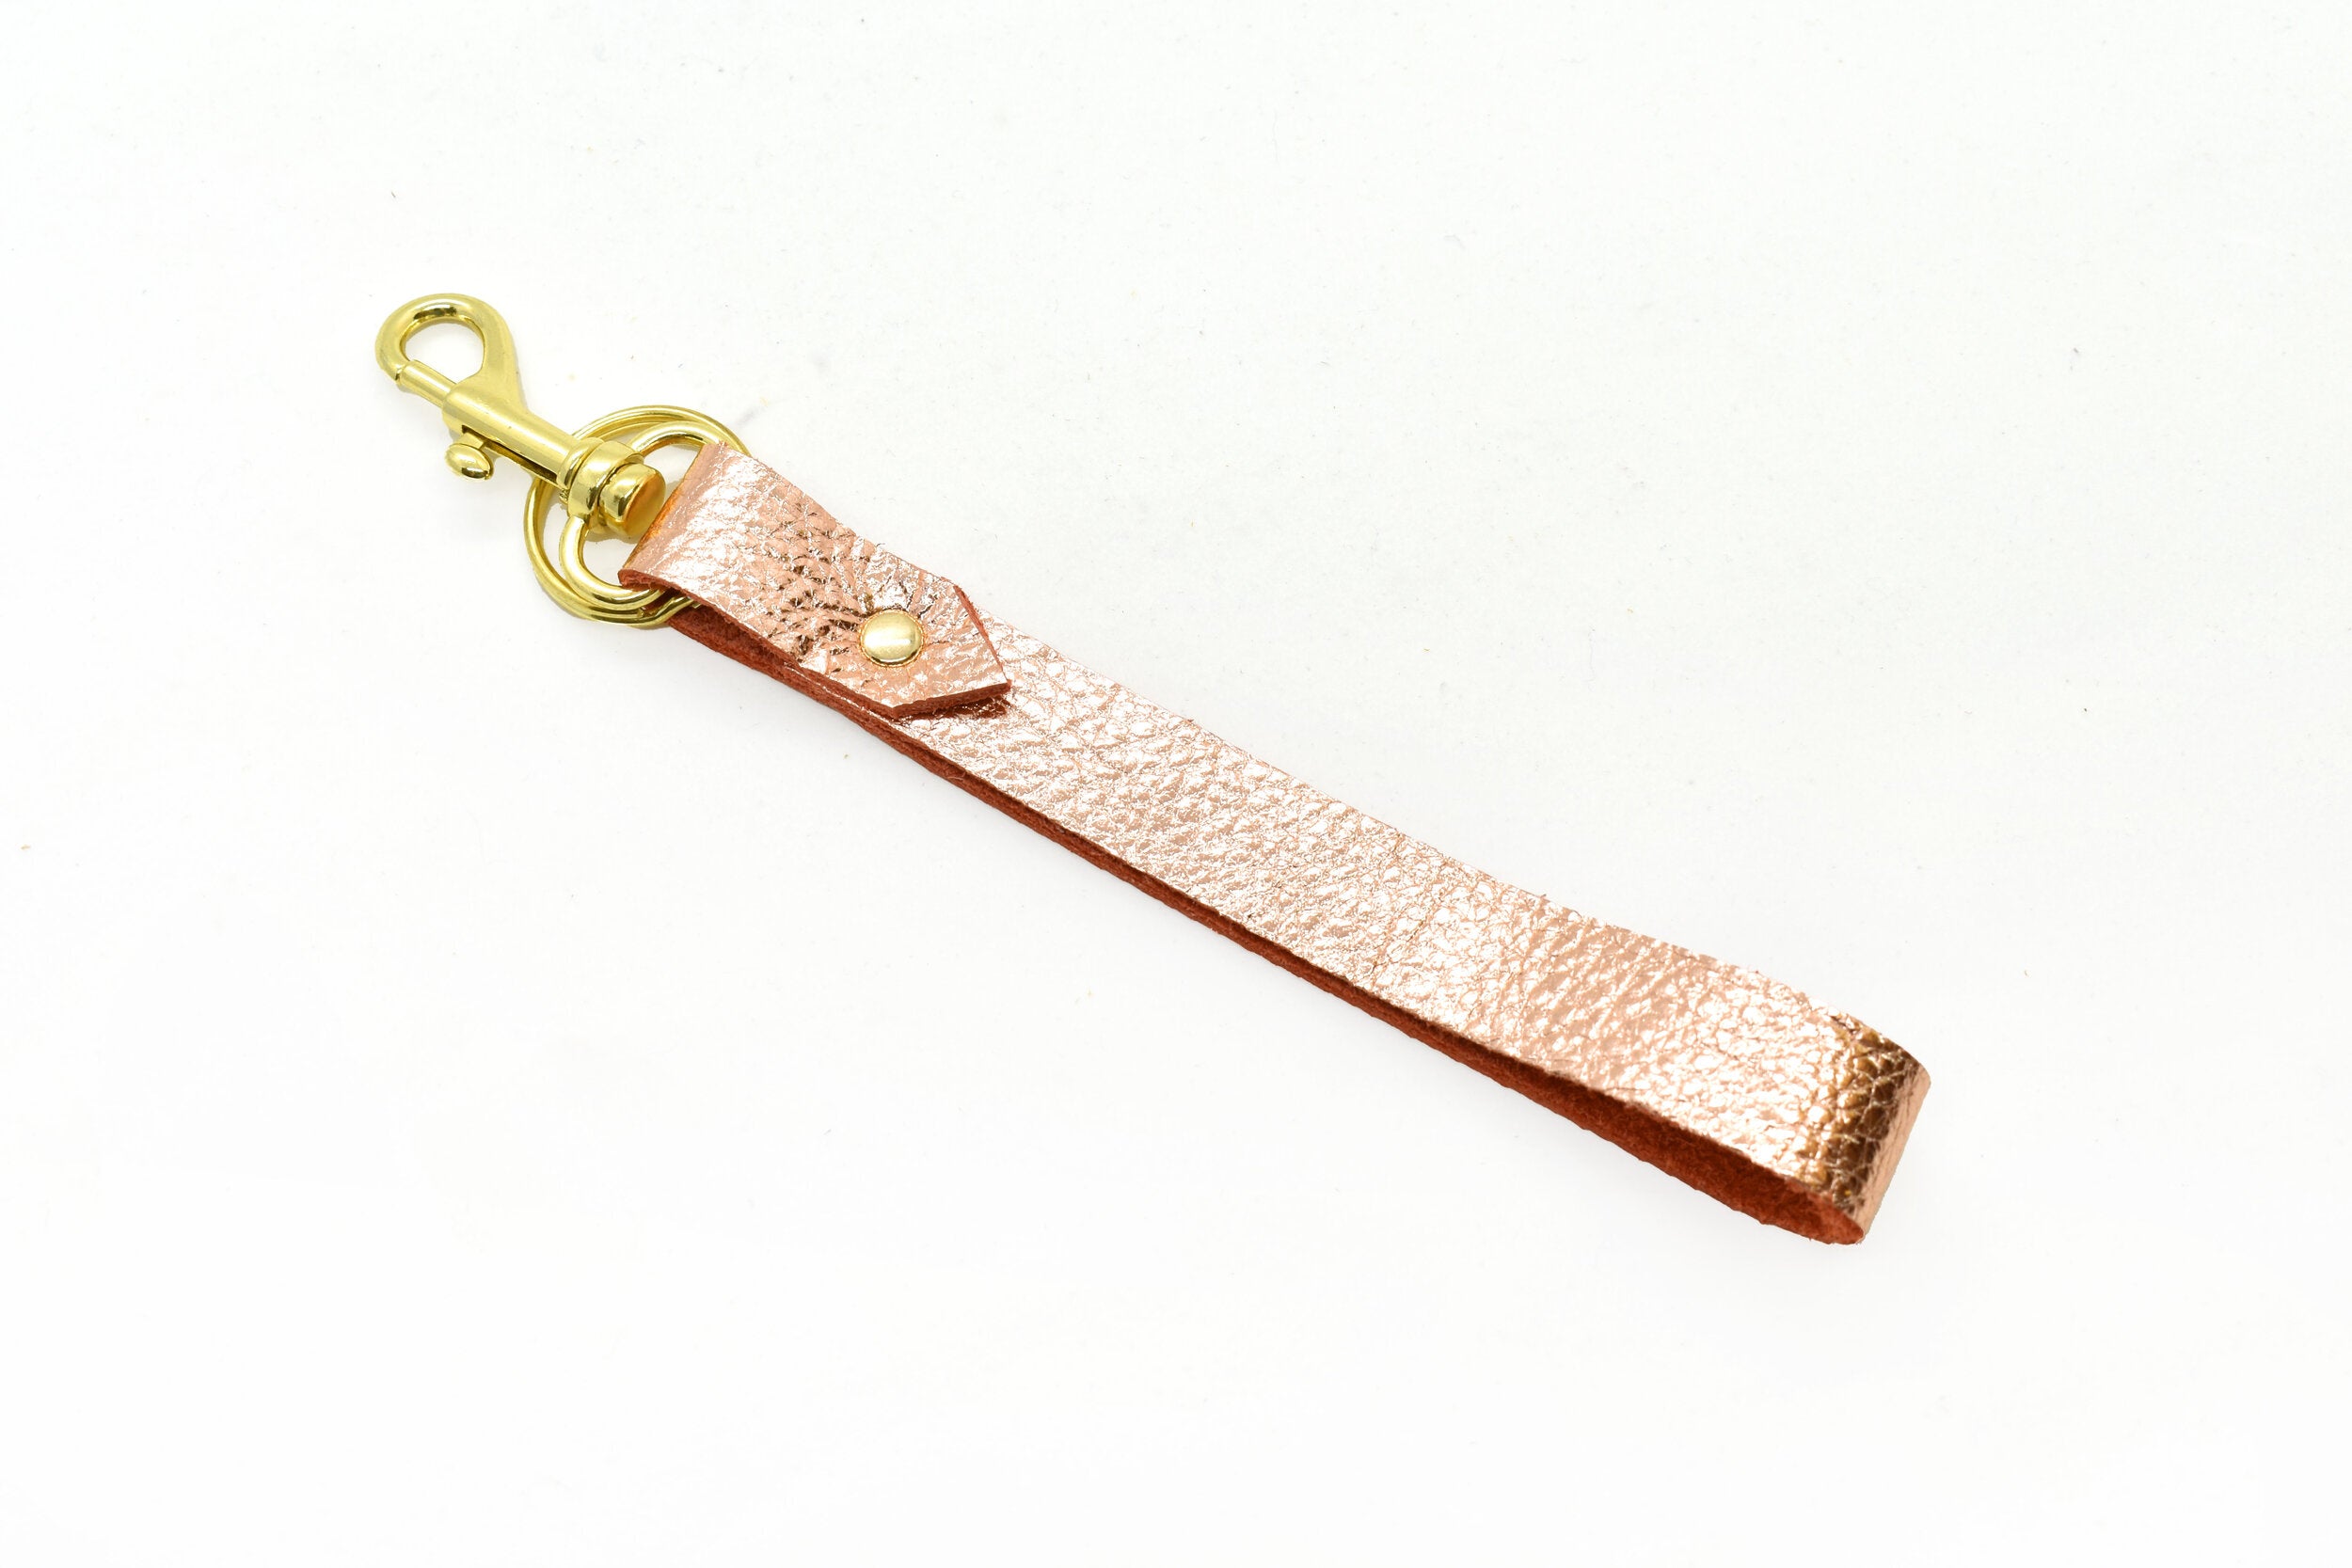 soft leather flexible loop keychain with bag clasp and key ring for carrying keys.